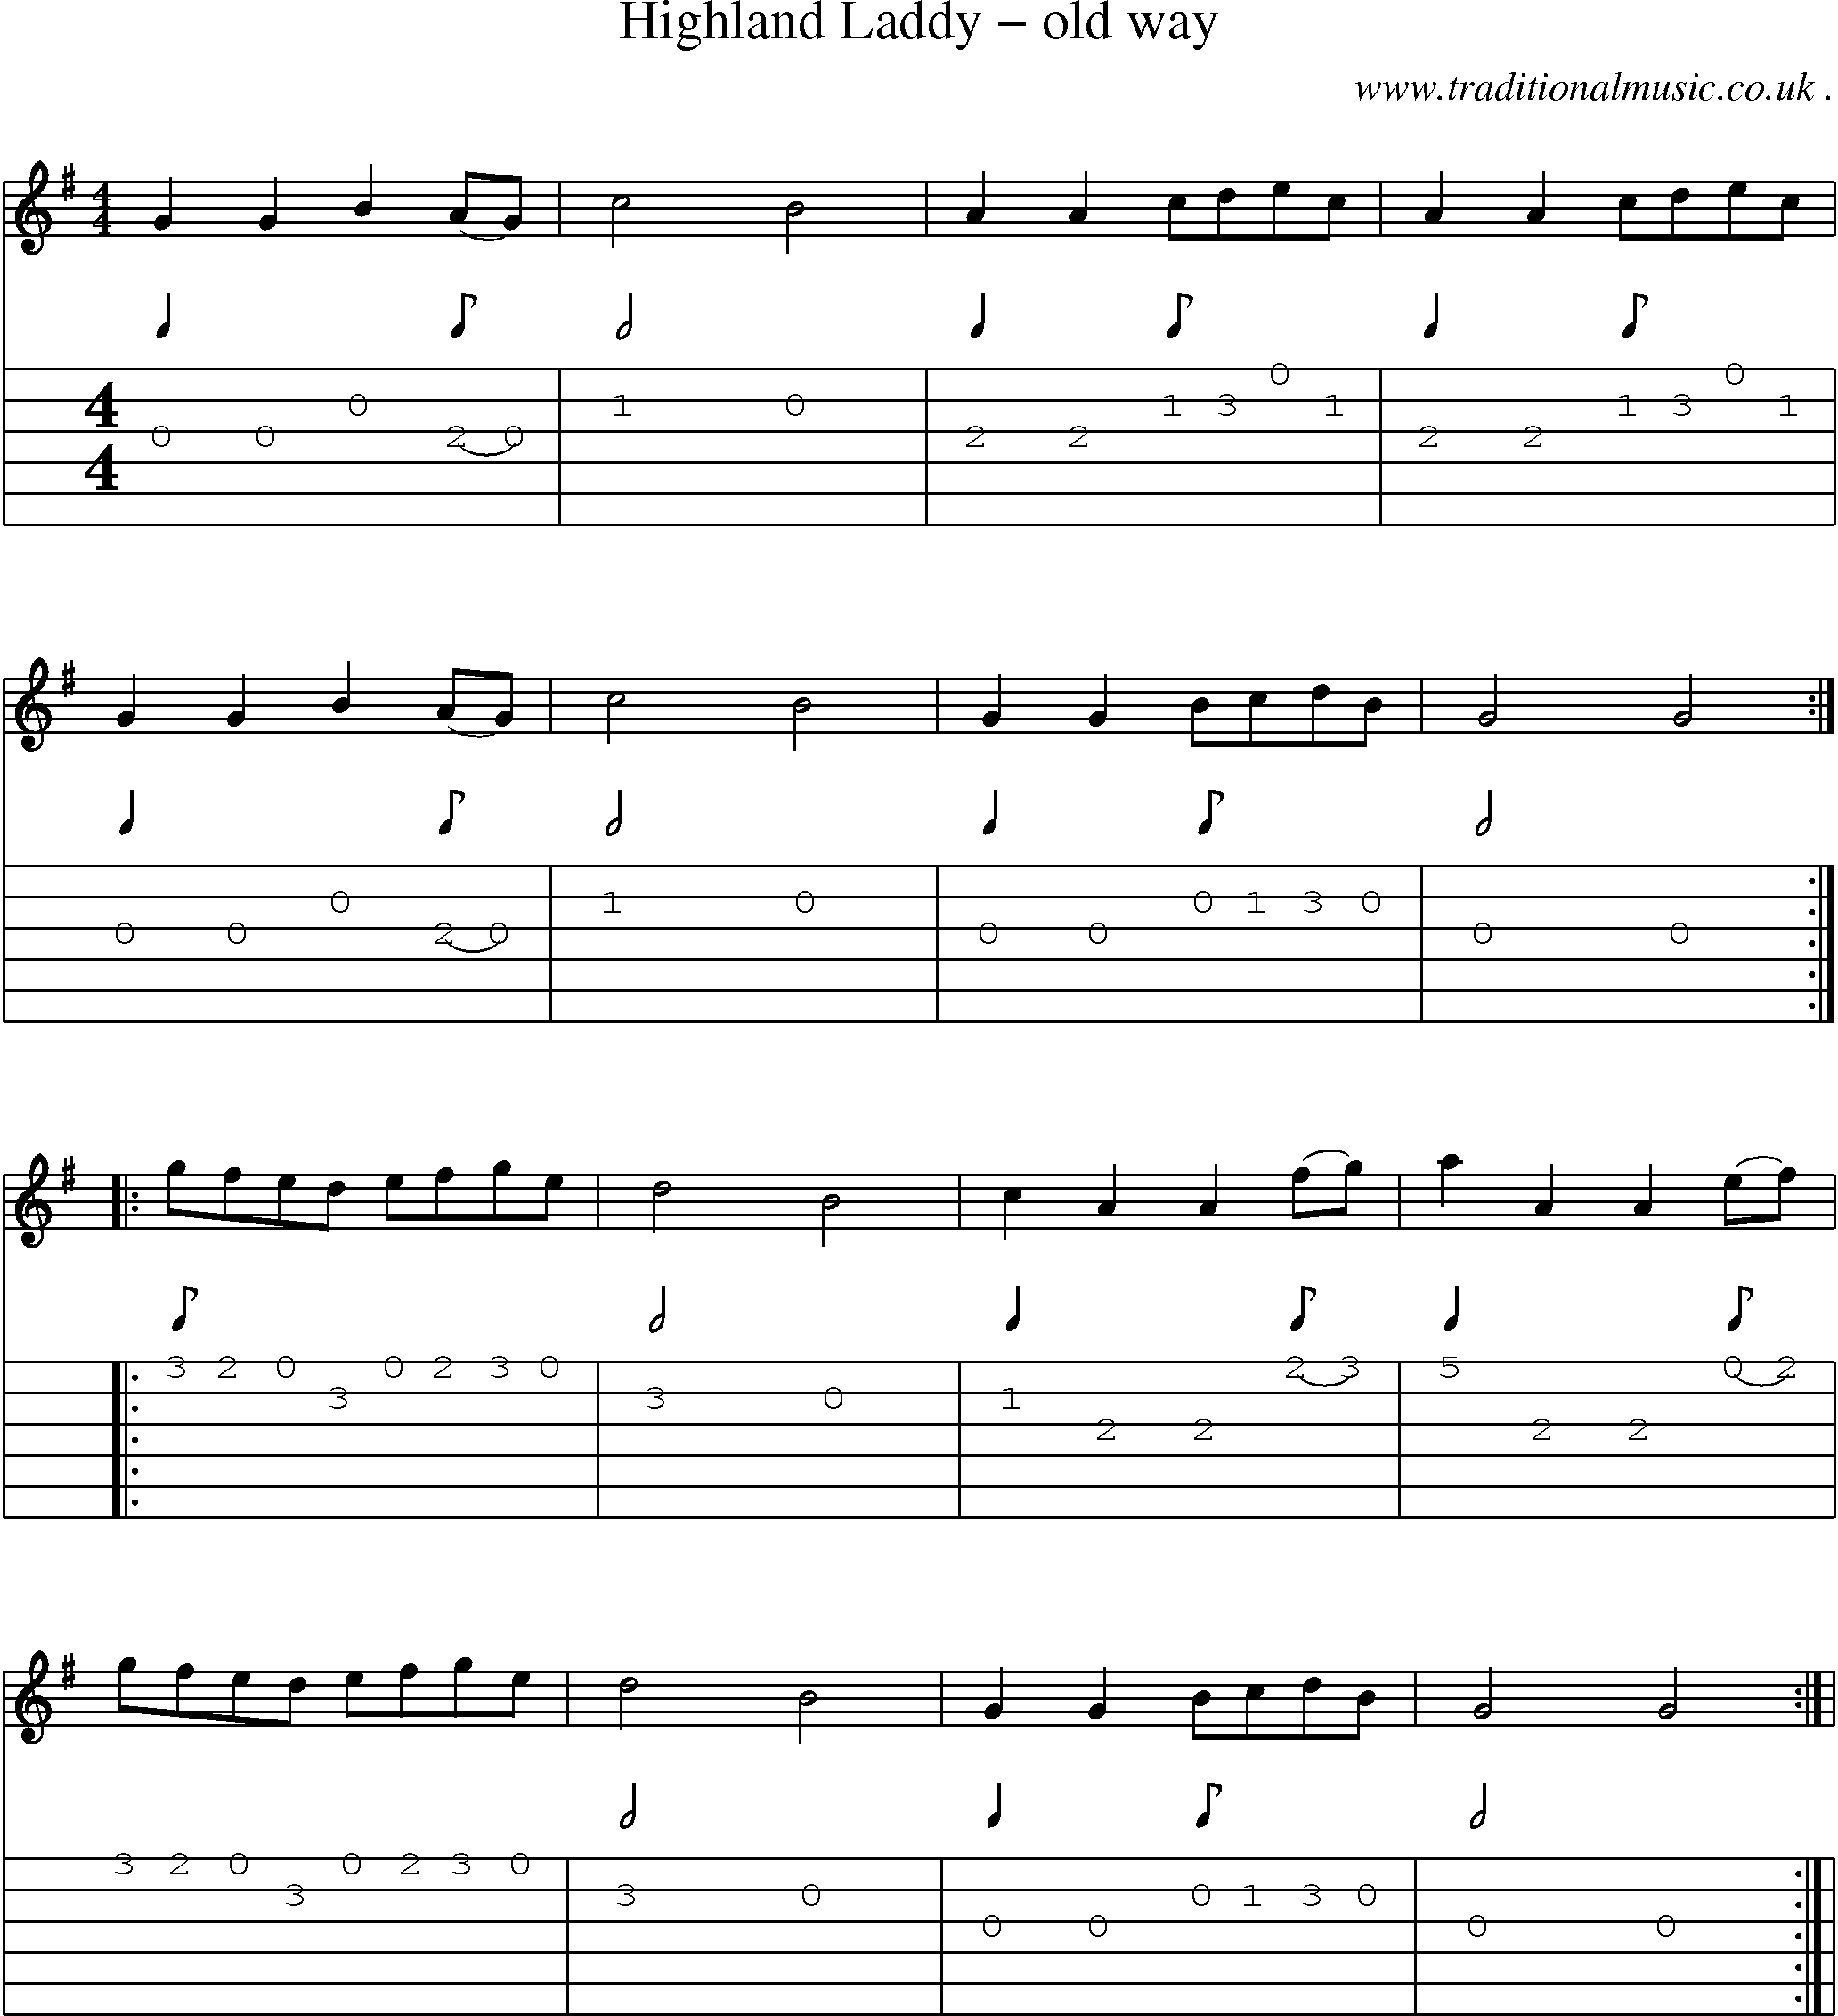 Sheet-Music and Guitar Tabs for Highland Laddy Old Way